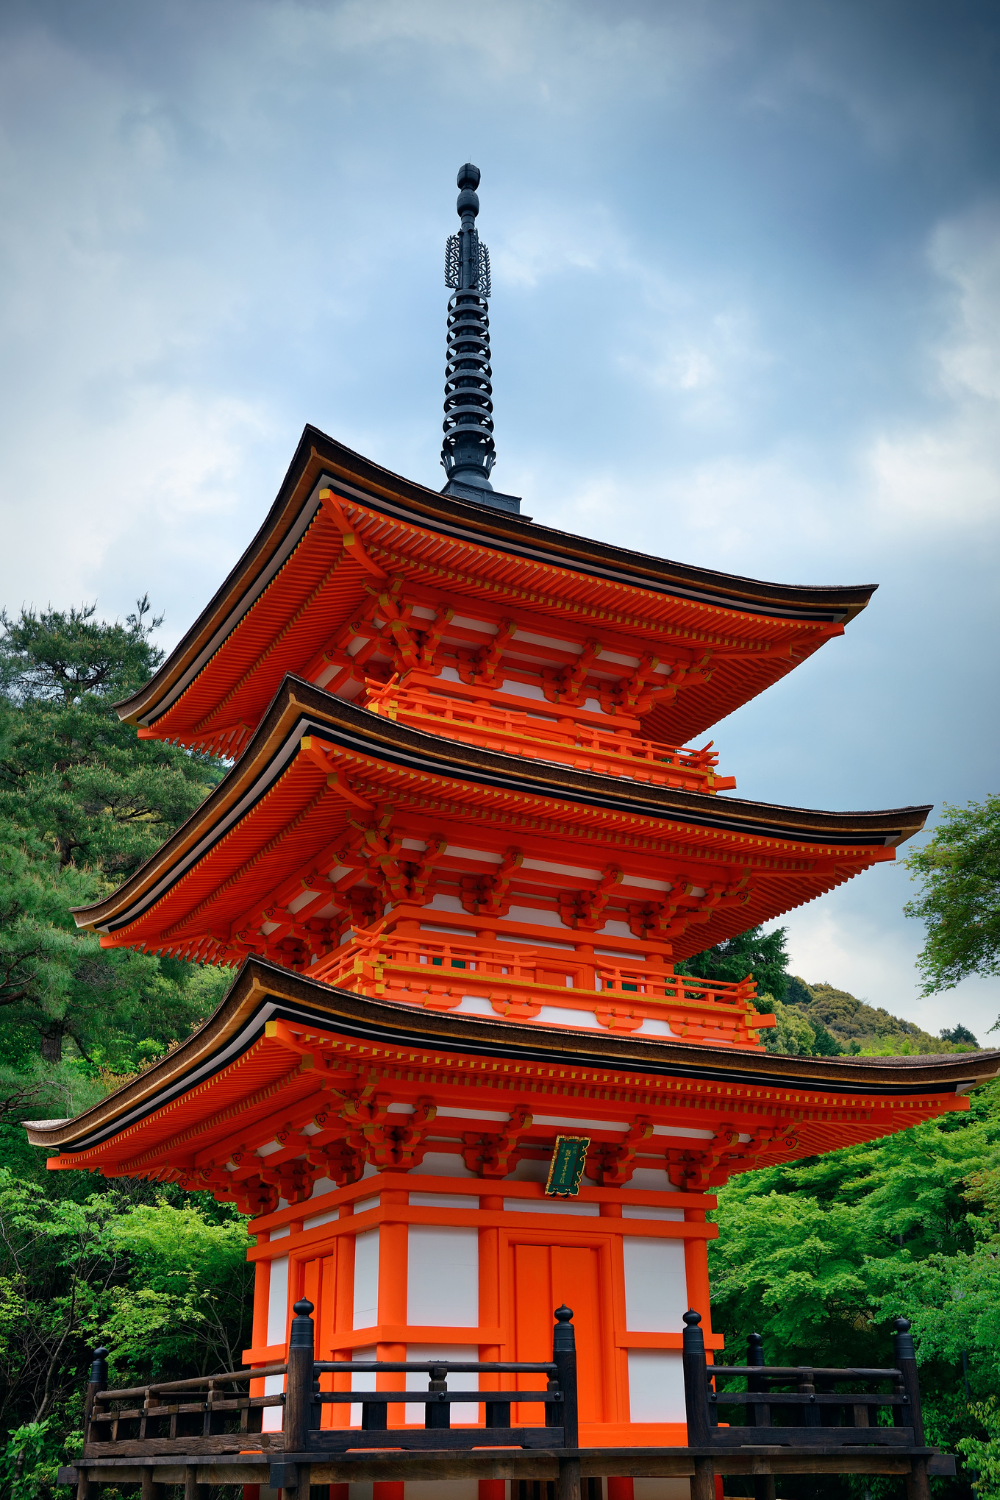 Red pagoda building in Kyoto, Japan